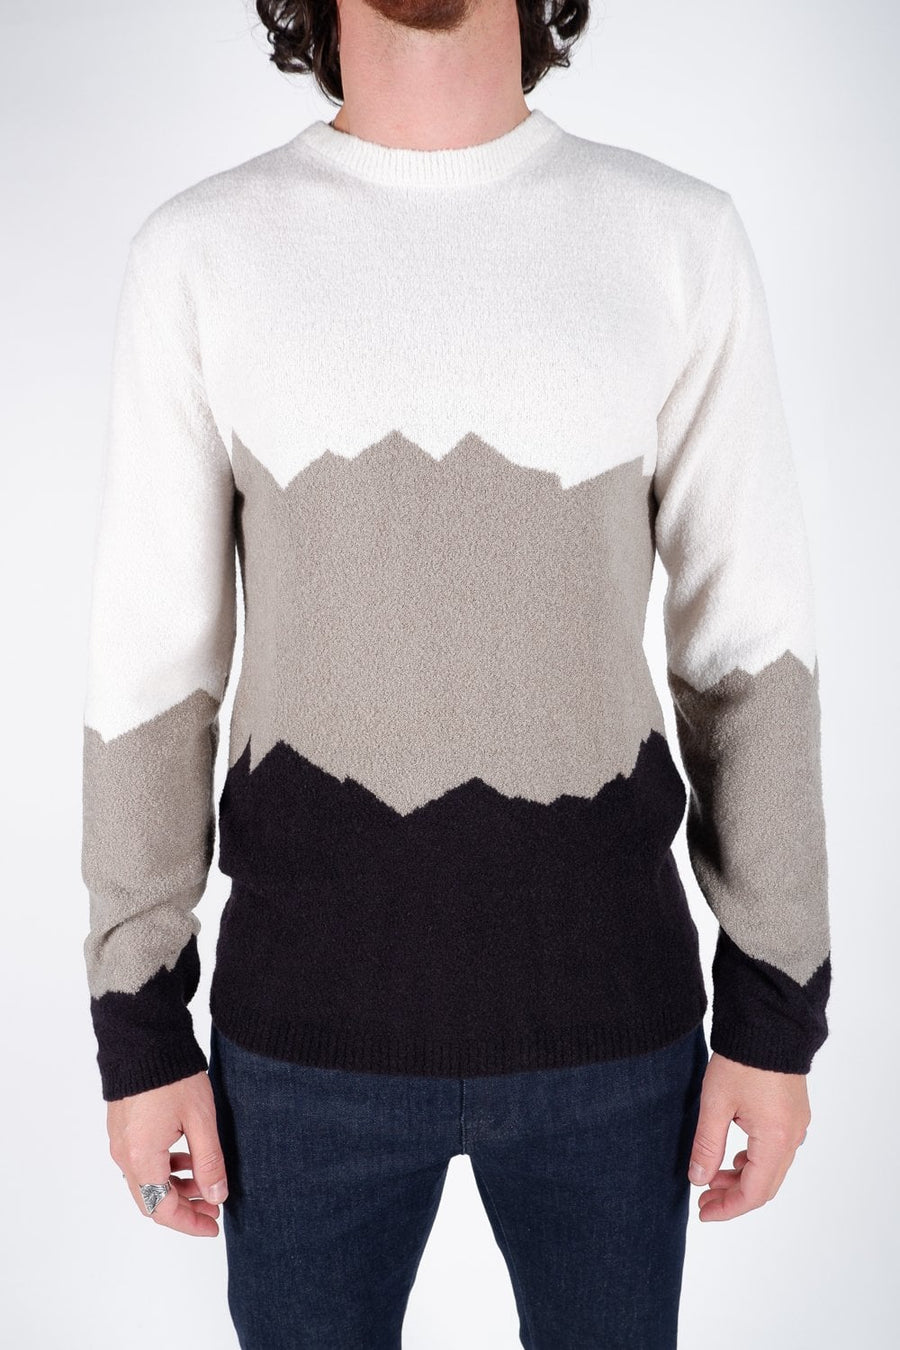 Buy the Daniele Fiesoli Peak Design Knitted Jumper in White/Black at Intro. Spend £50 for free UK delivery. Official stockists. We ship worldwide.